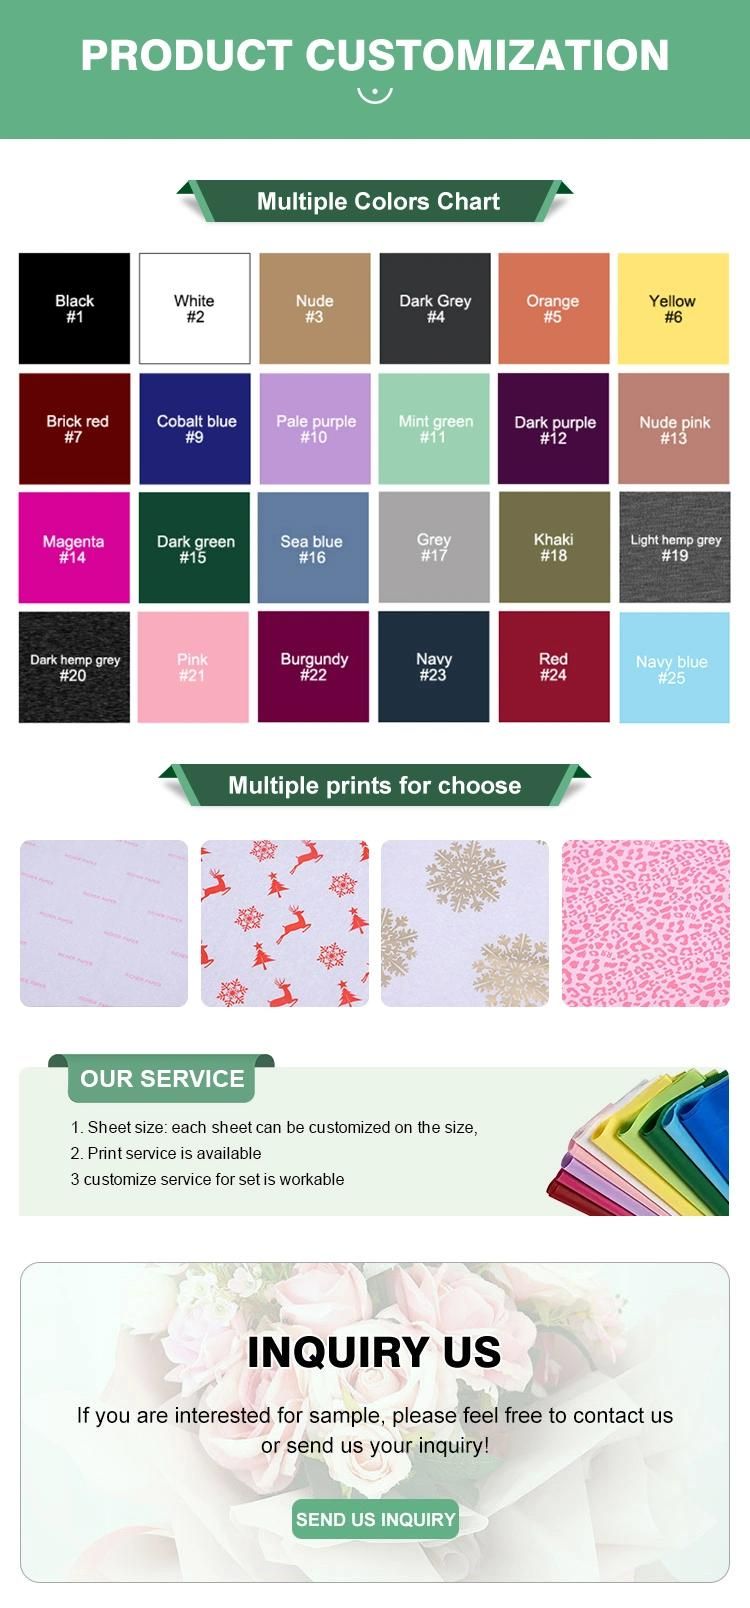 Promotion 17GSM Mg Mf Craft Flower Color Tissue Paper Wrapping